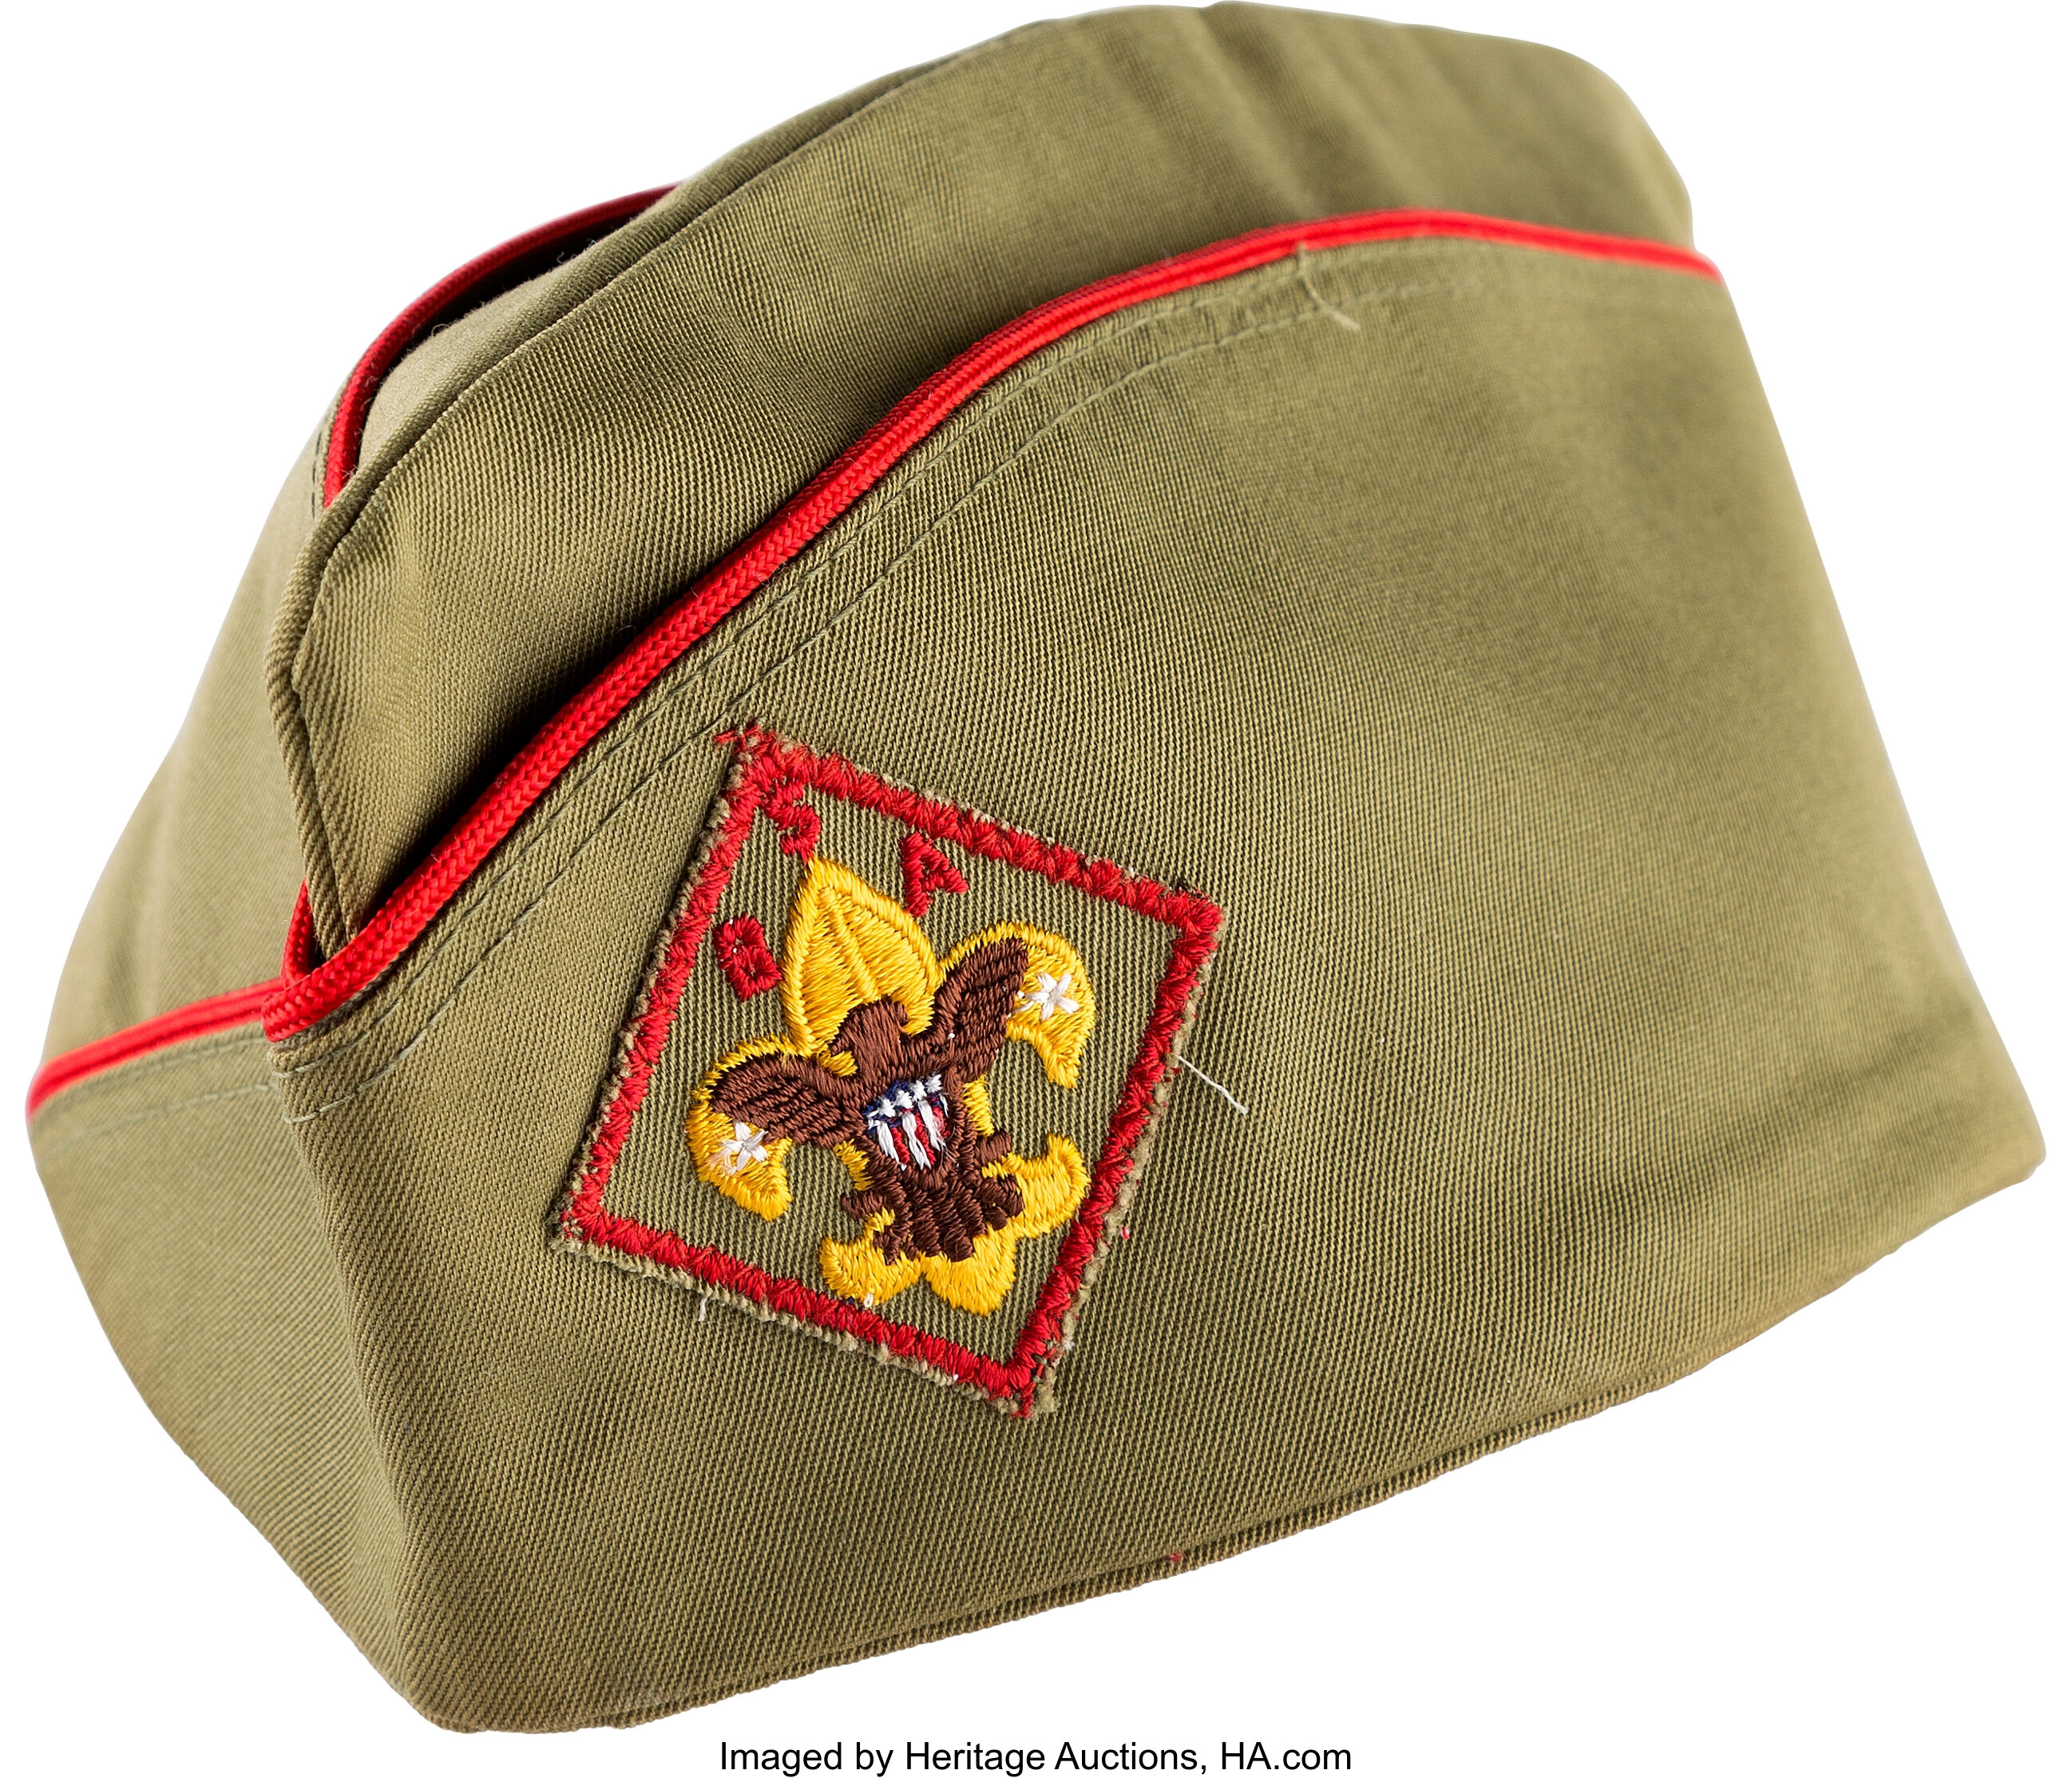 Boy Scouts: Garrison or Flat Field Hat Owned and Worn by Neil, Lot #52018